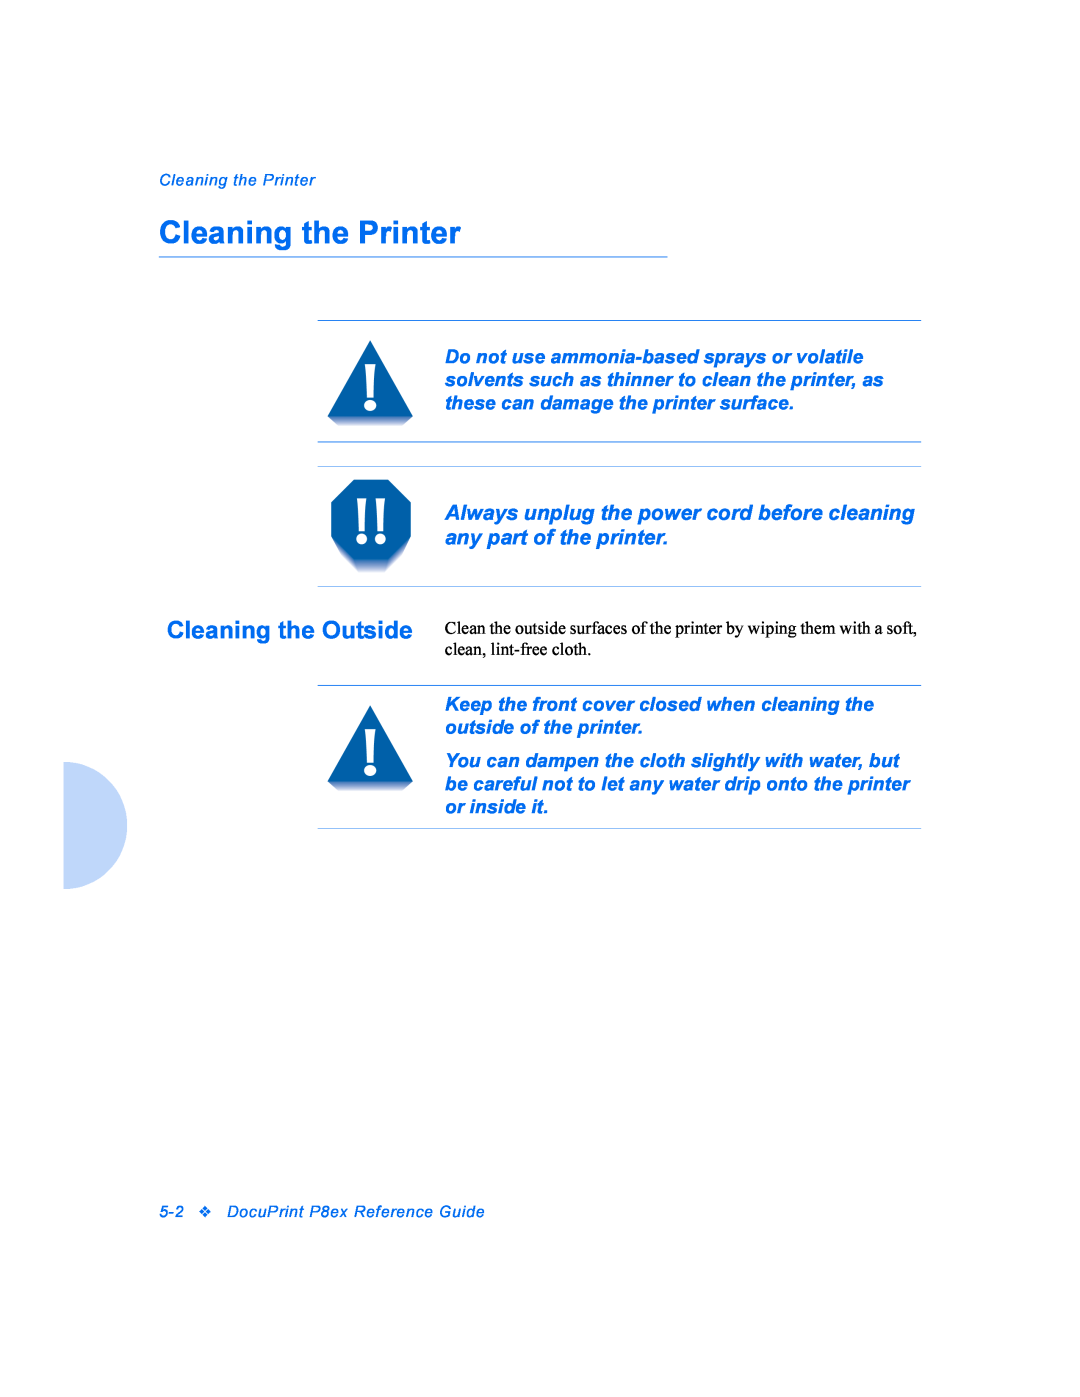 Xerox manual Cleaning the Printer, 5-2DocuPrint P8ex Reference Guide 